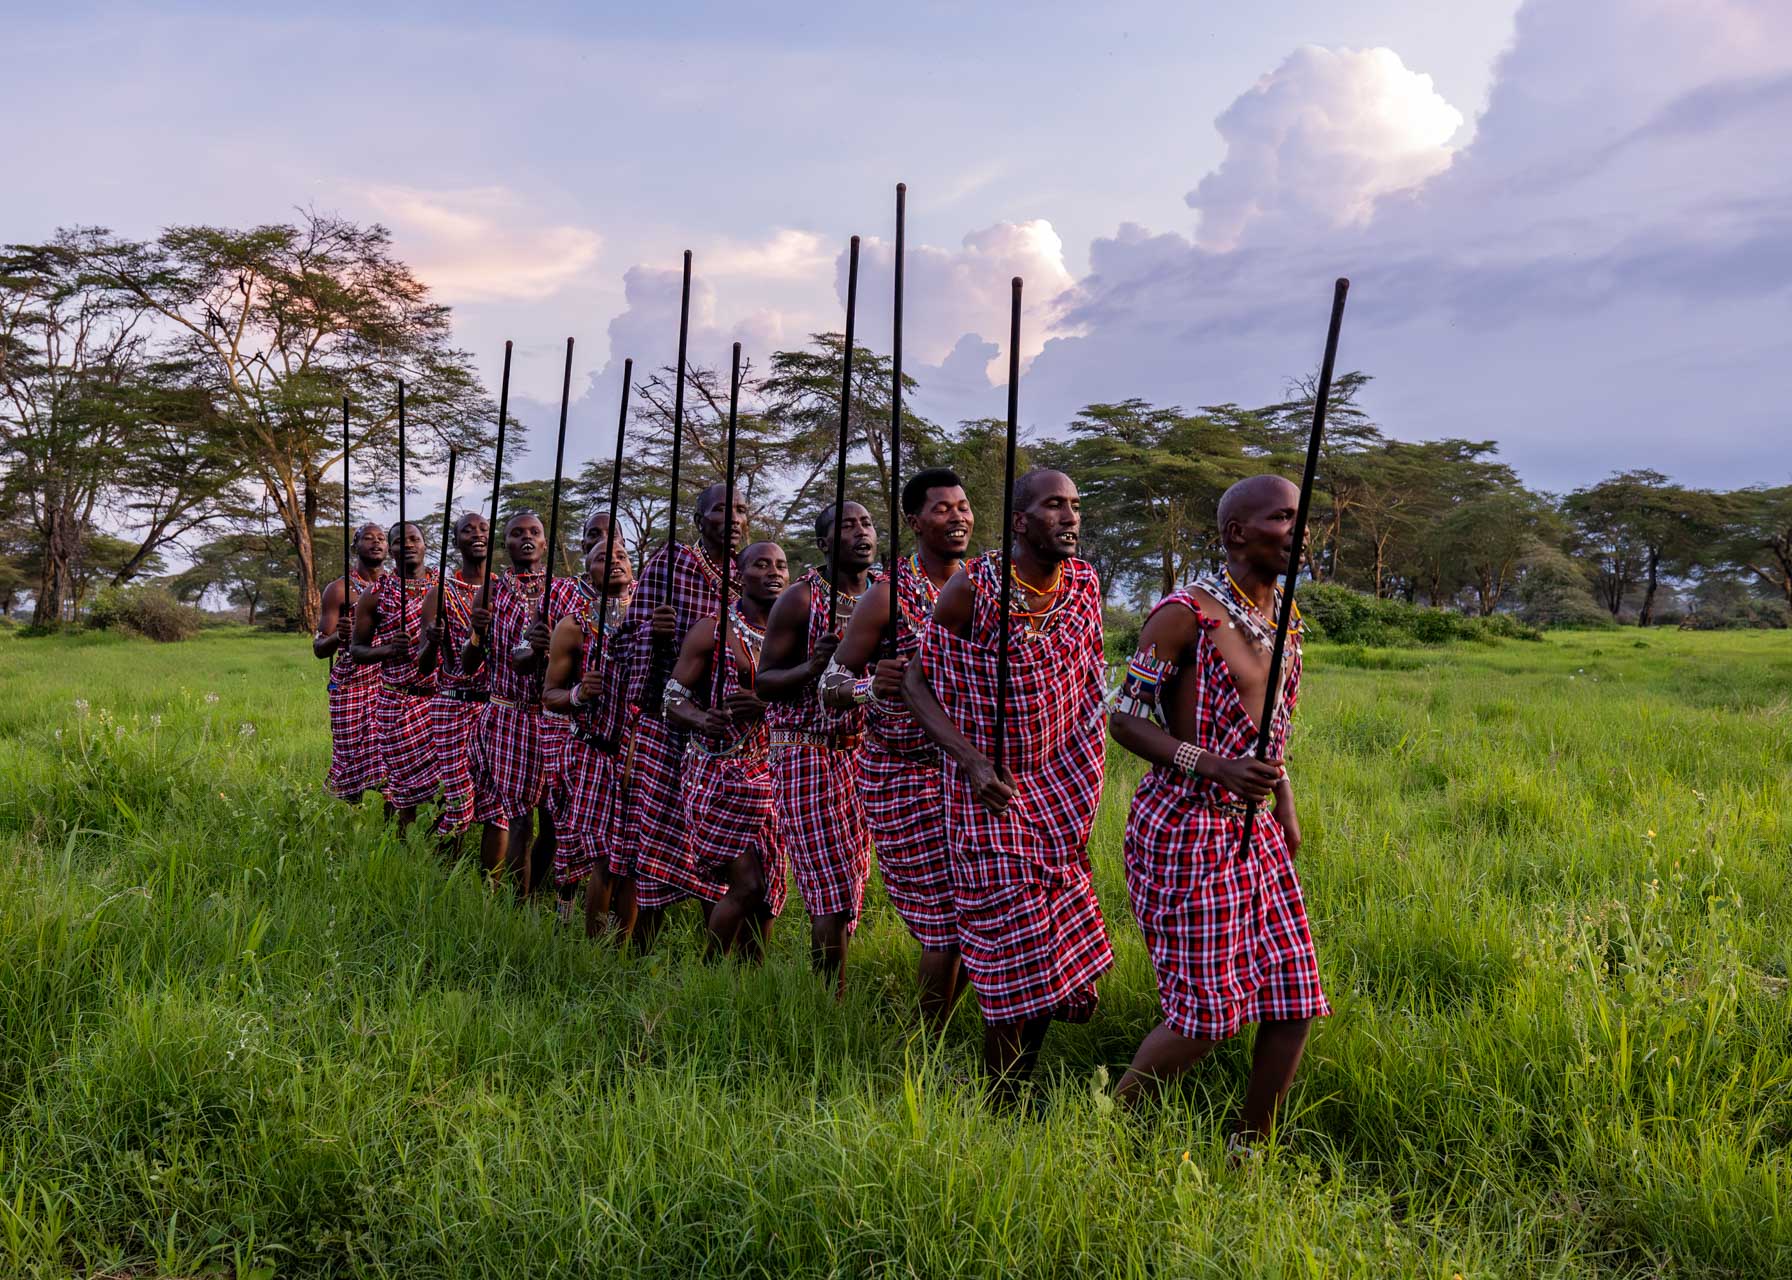 Above: At sunset, guests can watch the Maasai warriors light the baraza fire